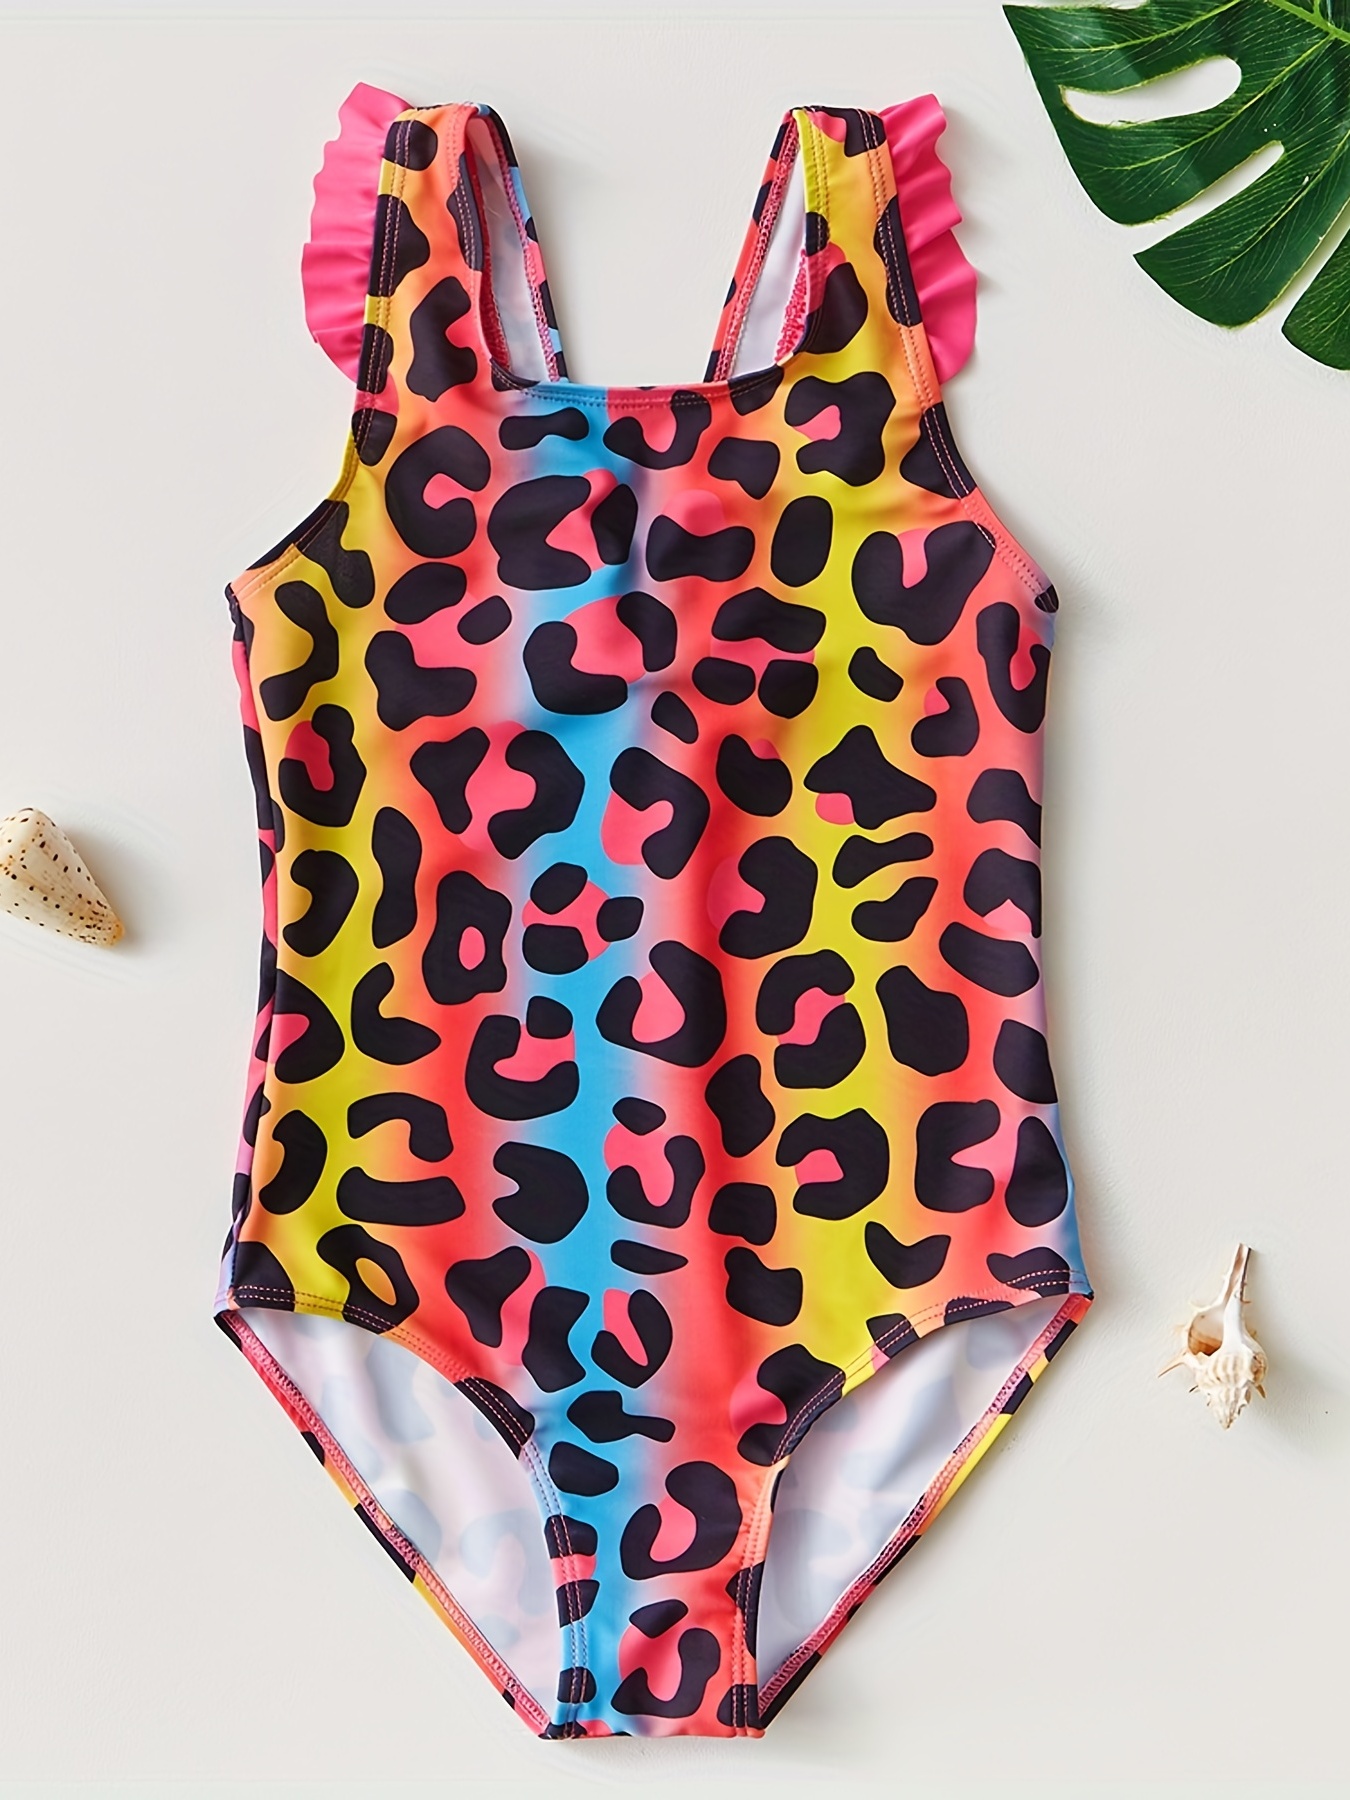 Children's One Piece Printed Sling Swimming Suspender Swimsuit